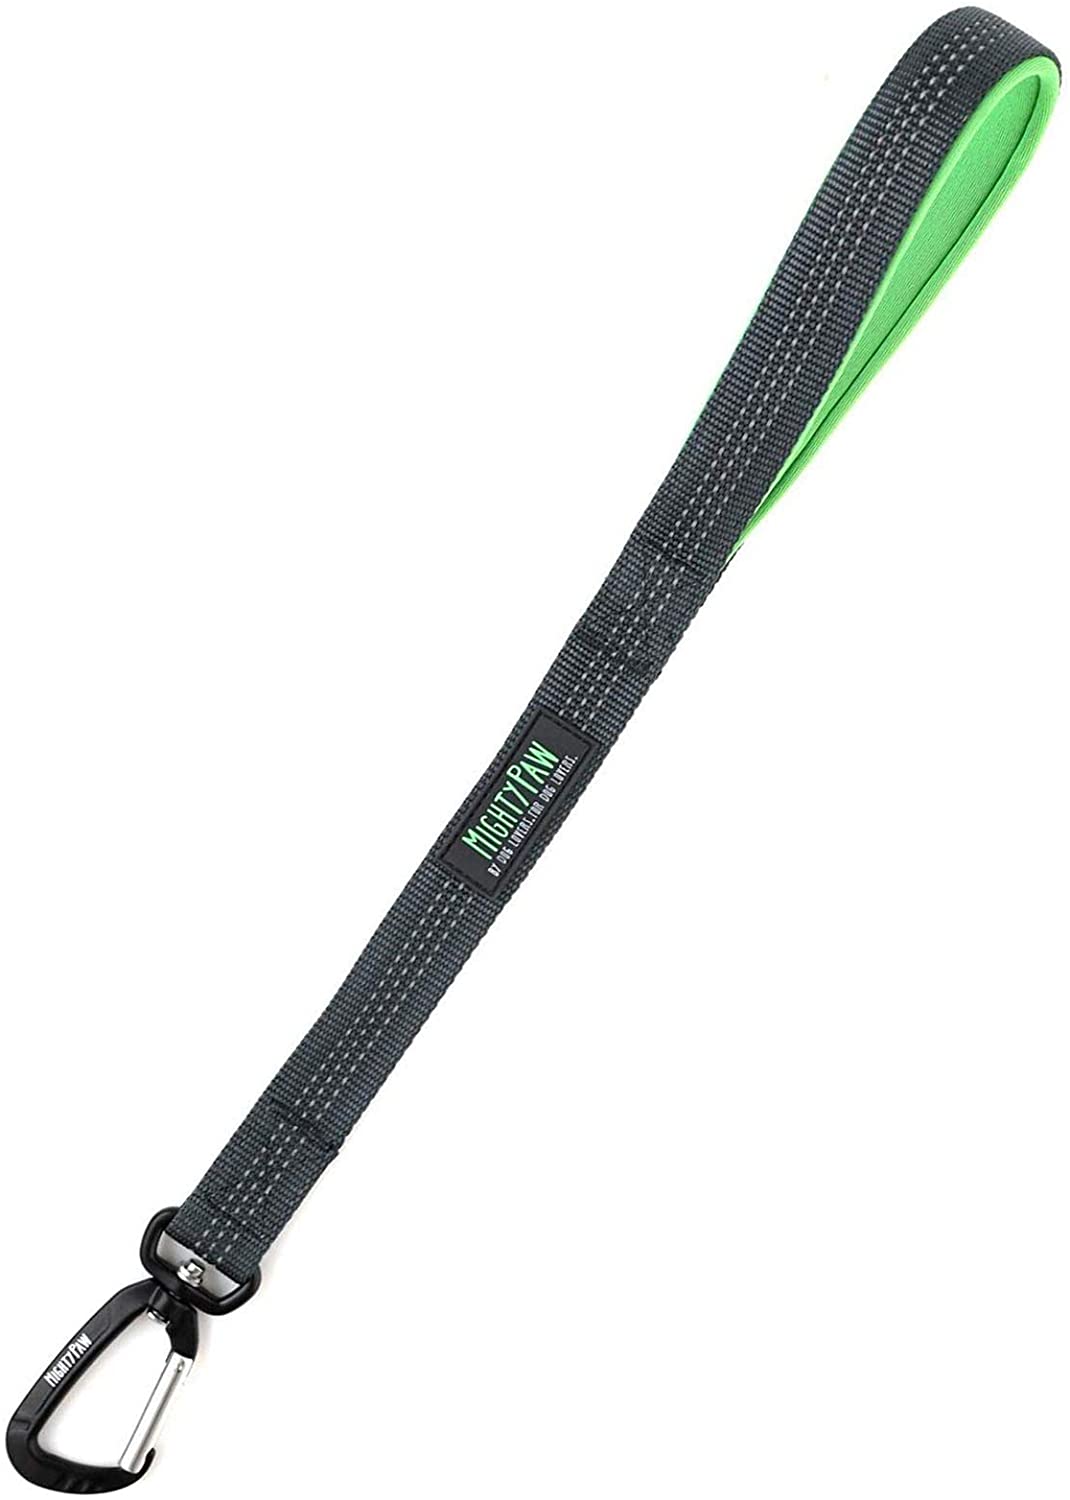 Mighty Paw Short Traffic Handle Dog Leash for Controlled Walks